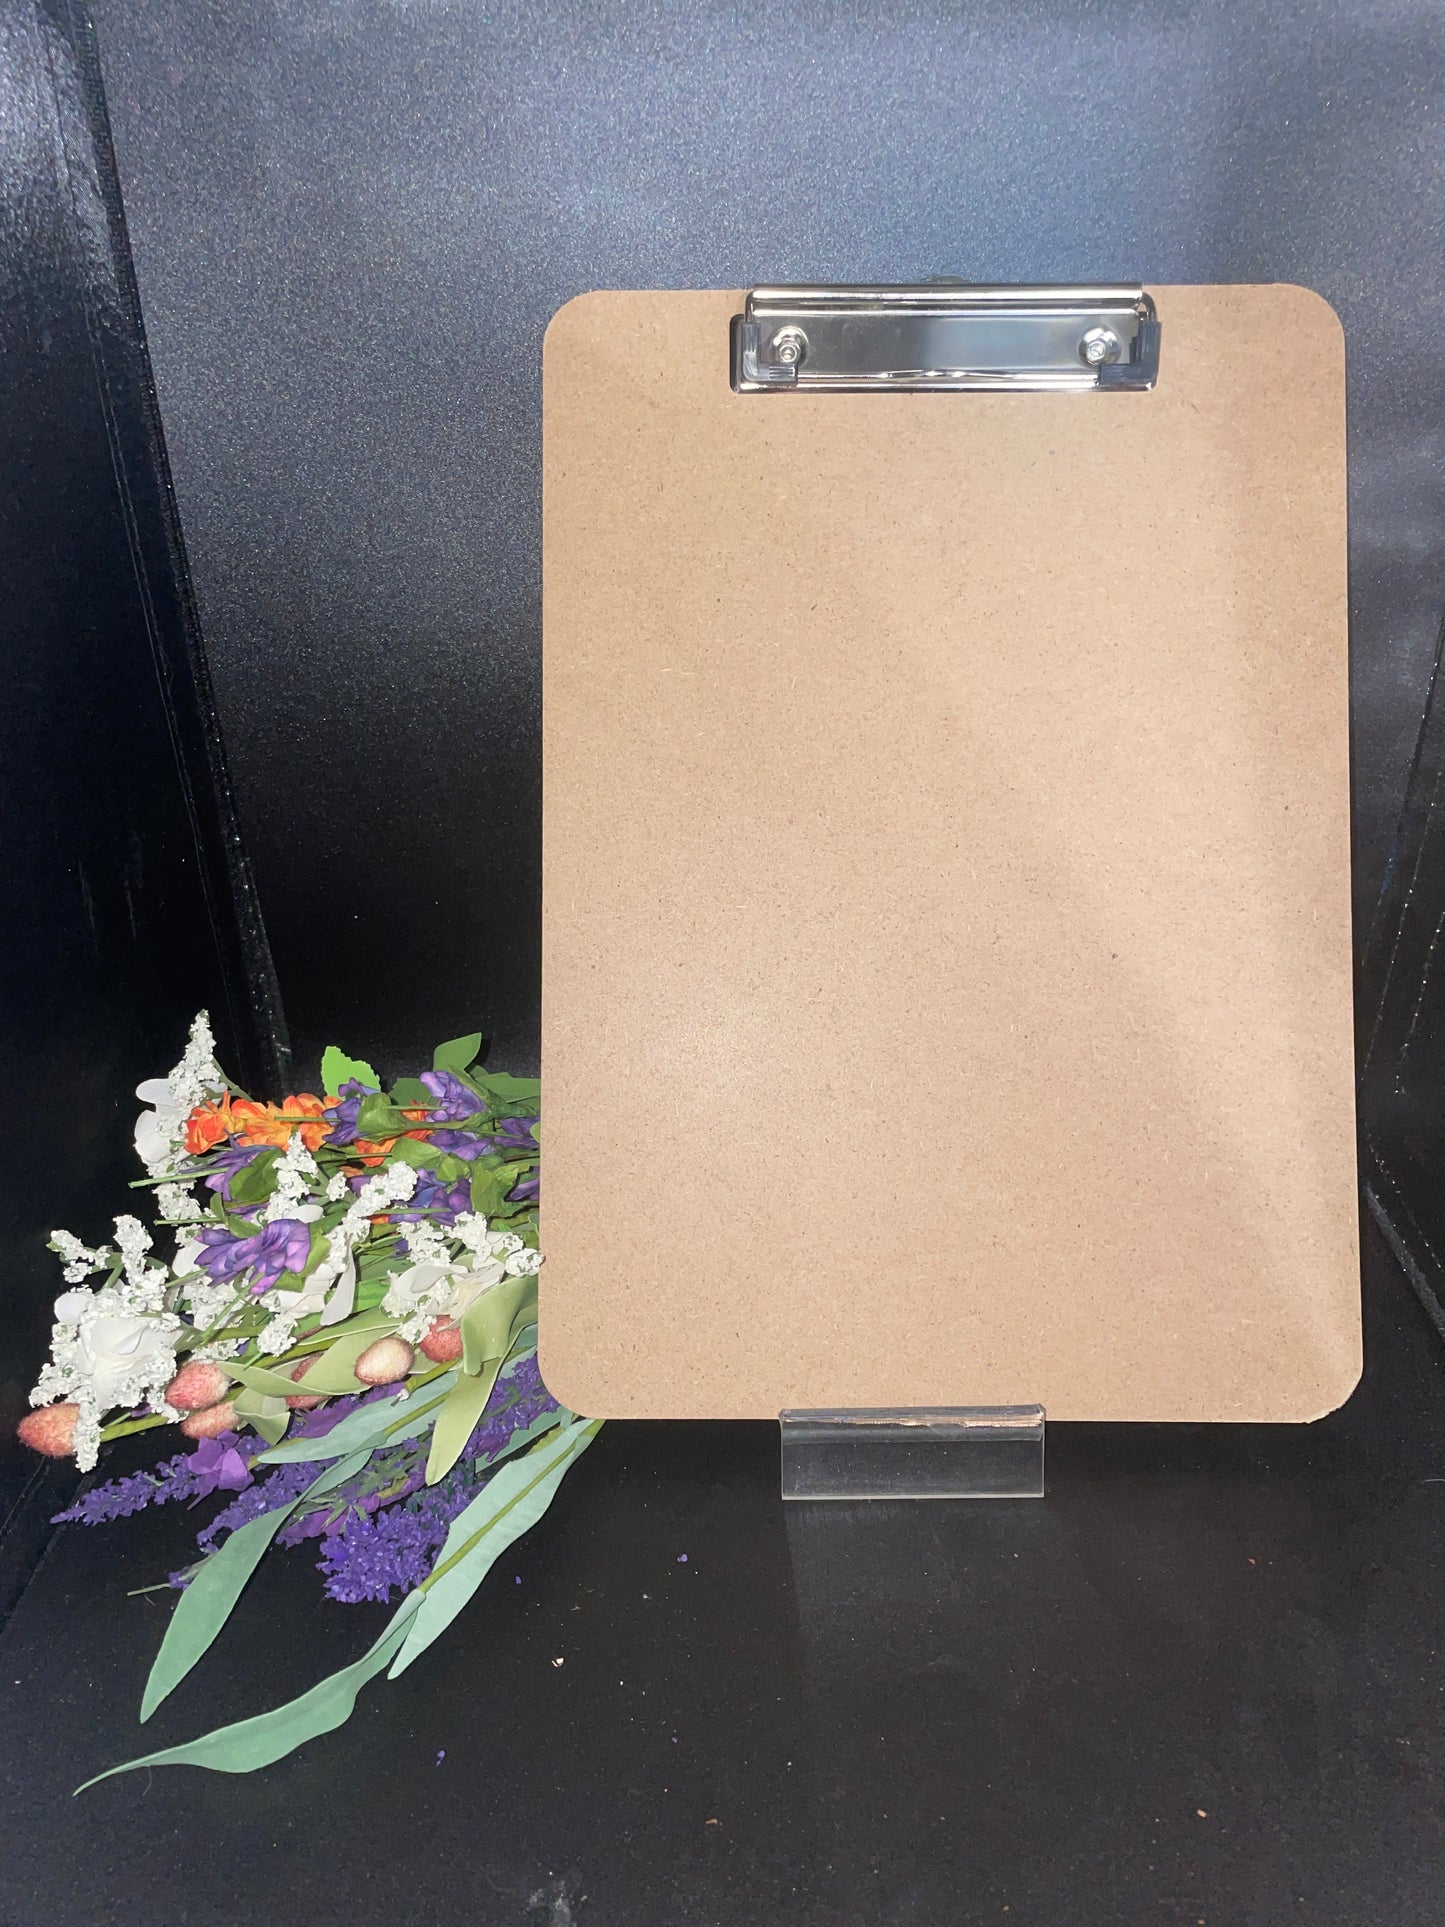 flower d20 Clip Board - Clip board, clipboard, nerdy clipboard, gift for nerd, dungeons and dragons, d&d, tabletop, gamer, school, work, dungeon master, dungeon crawl, gift for mom